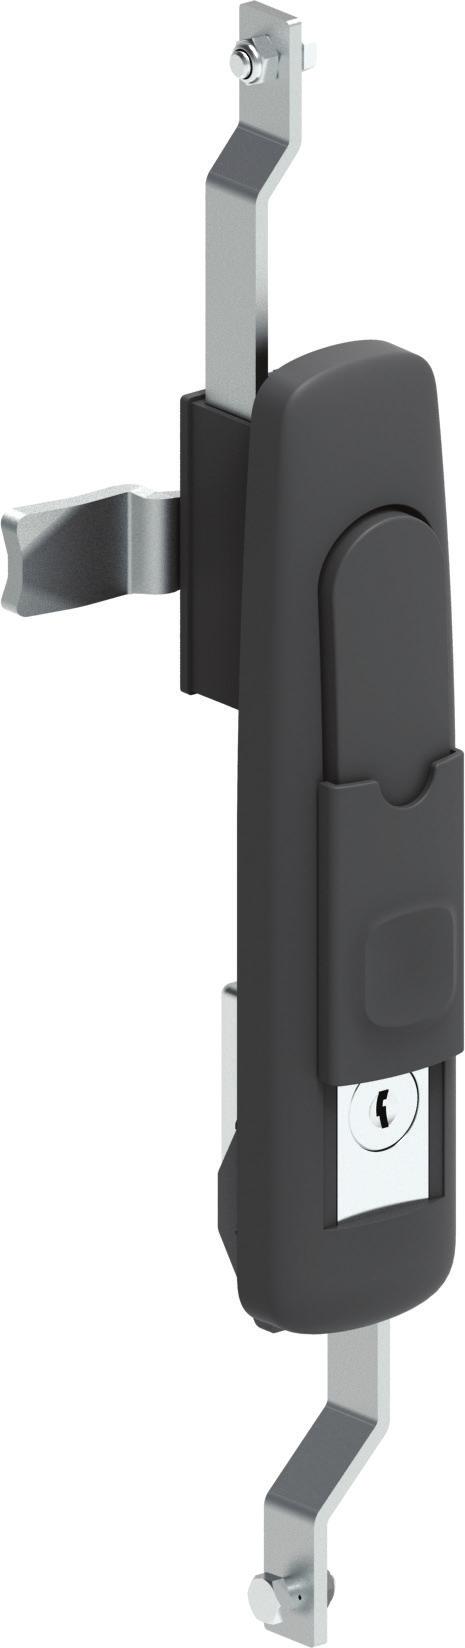 ROD-LATCH SYSTEM MODULER SYSTEM SWINGHANDLE 407 Swing handle has a modular lock structure allows easy modification for customer requests Lock and modules could be ordered seperately Single point